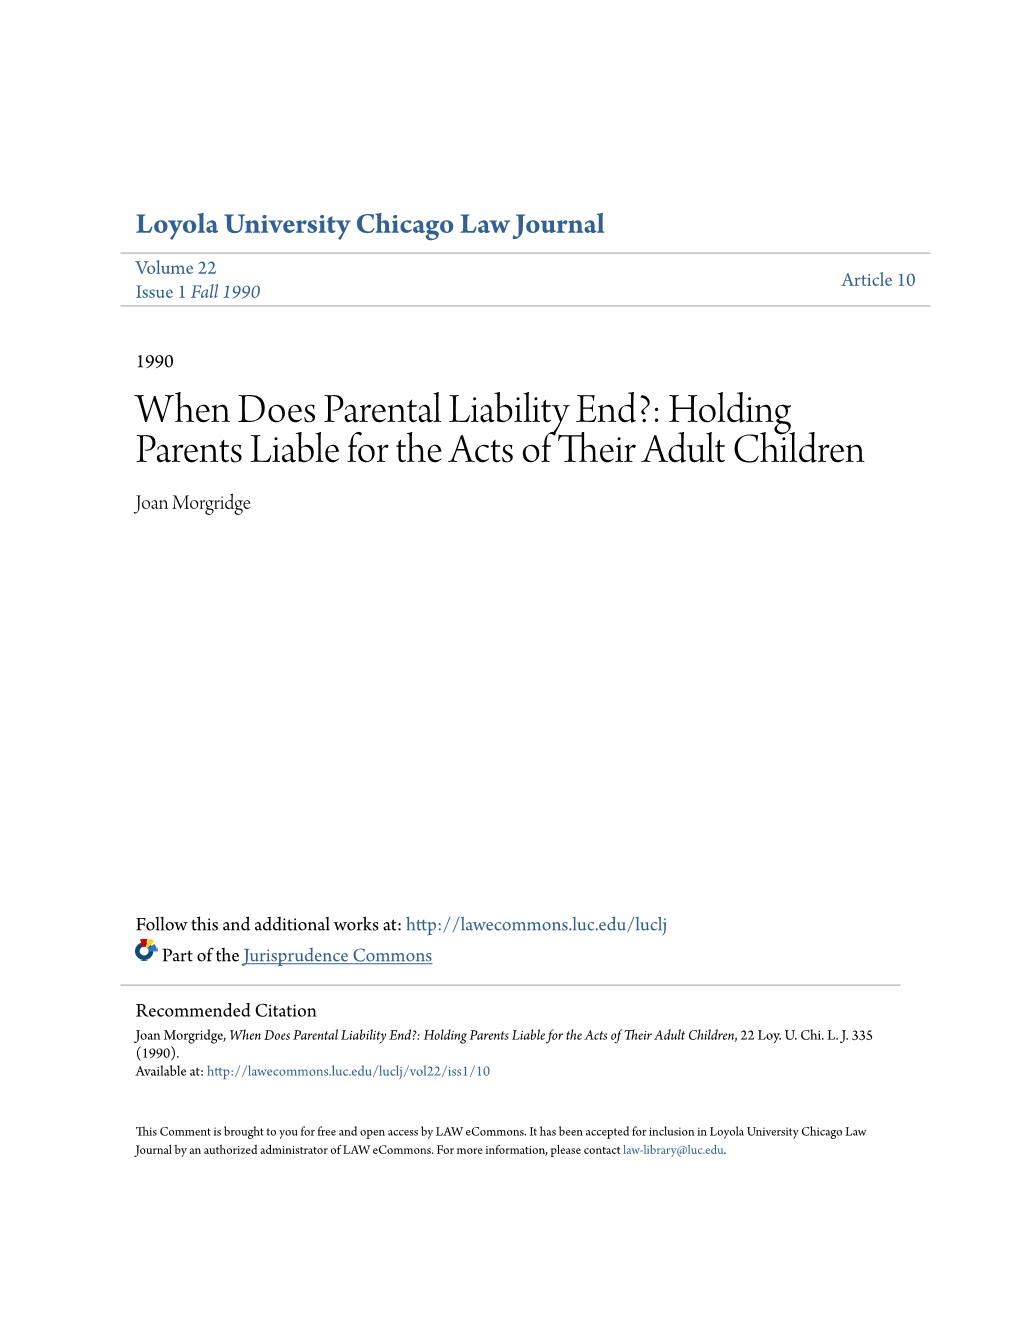 Holding Parents Liable for the Acts of Their Adult Children, 22 Loy